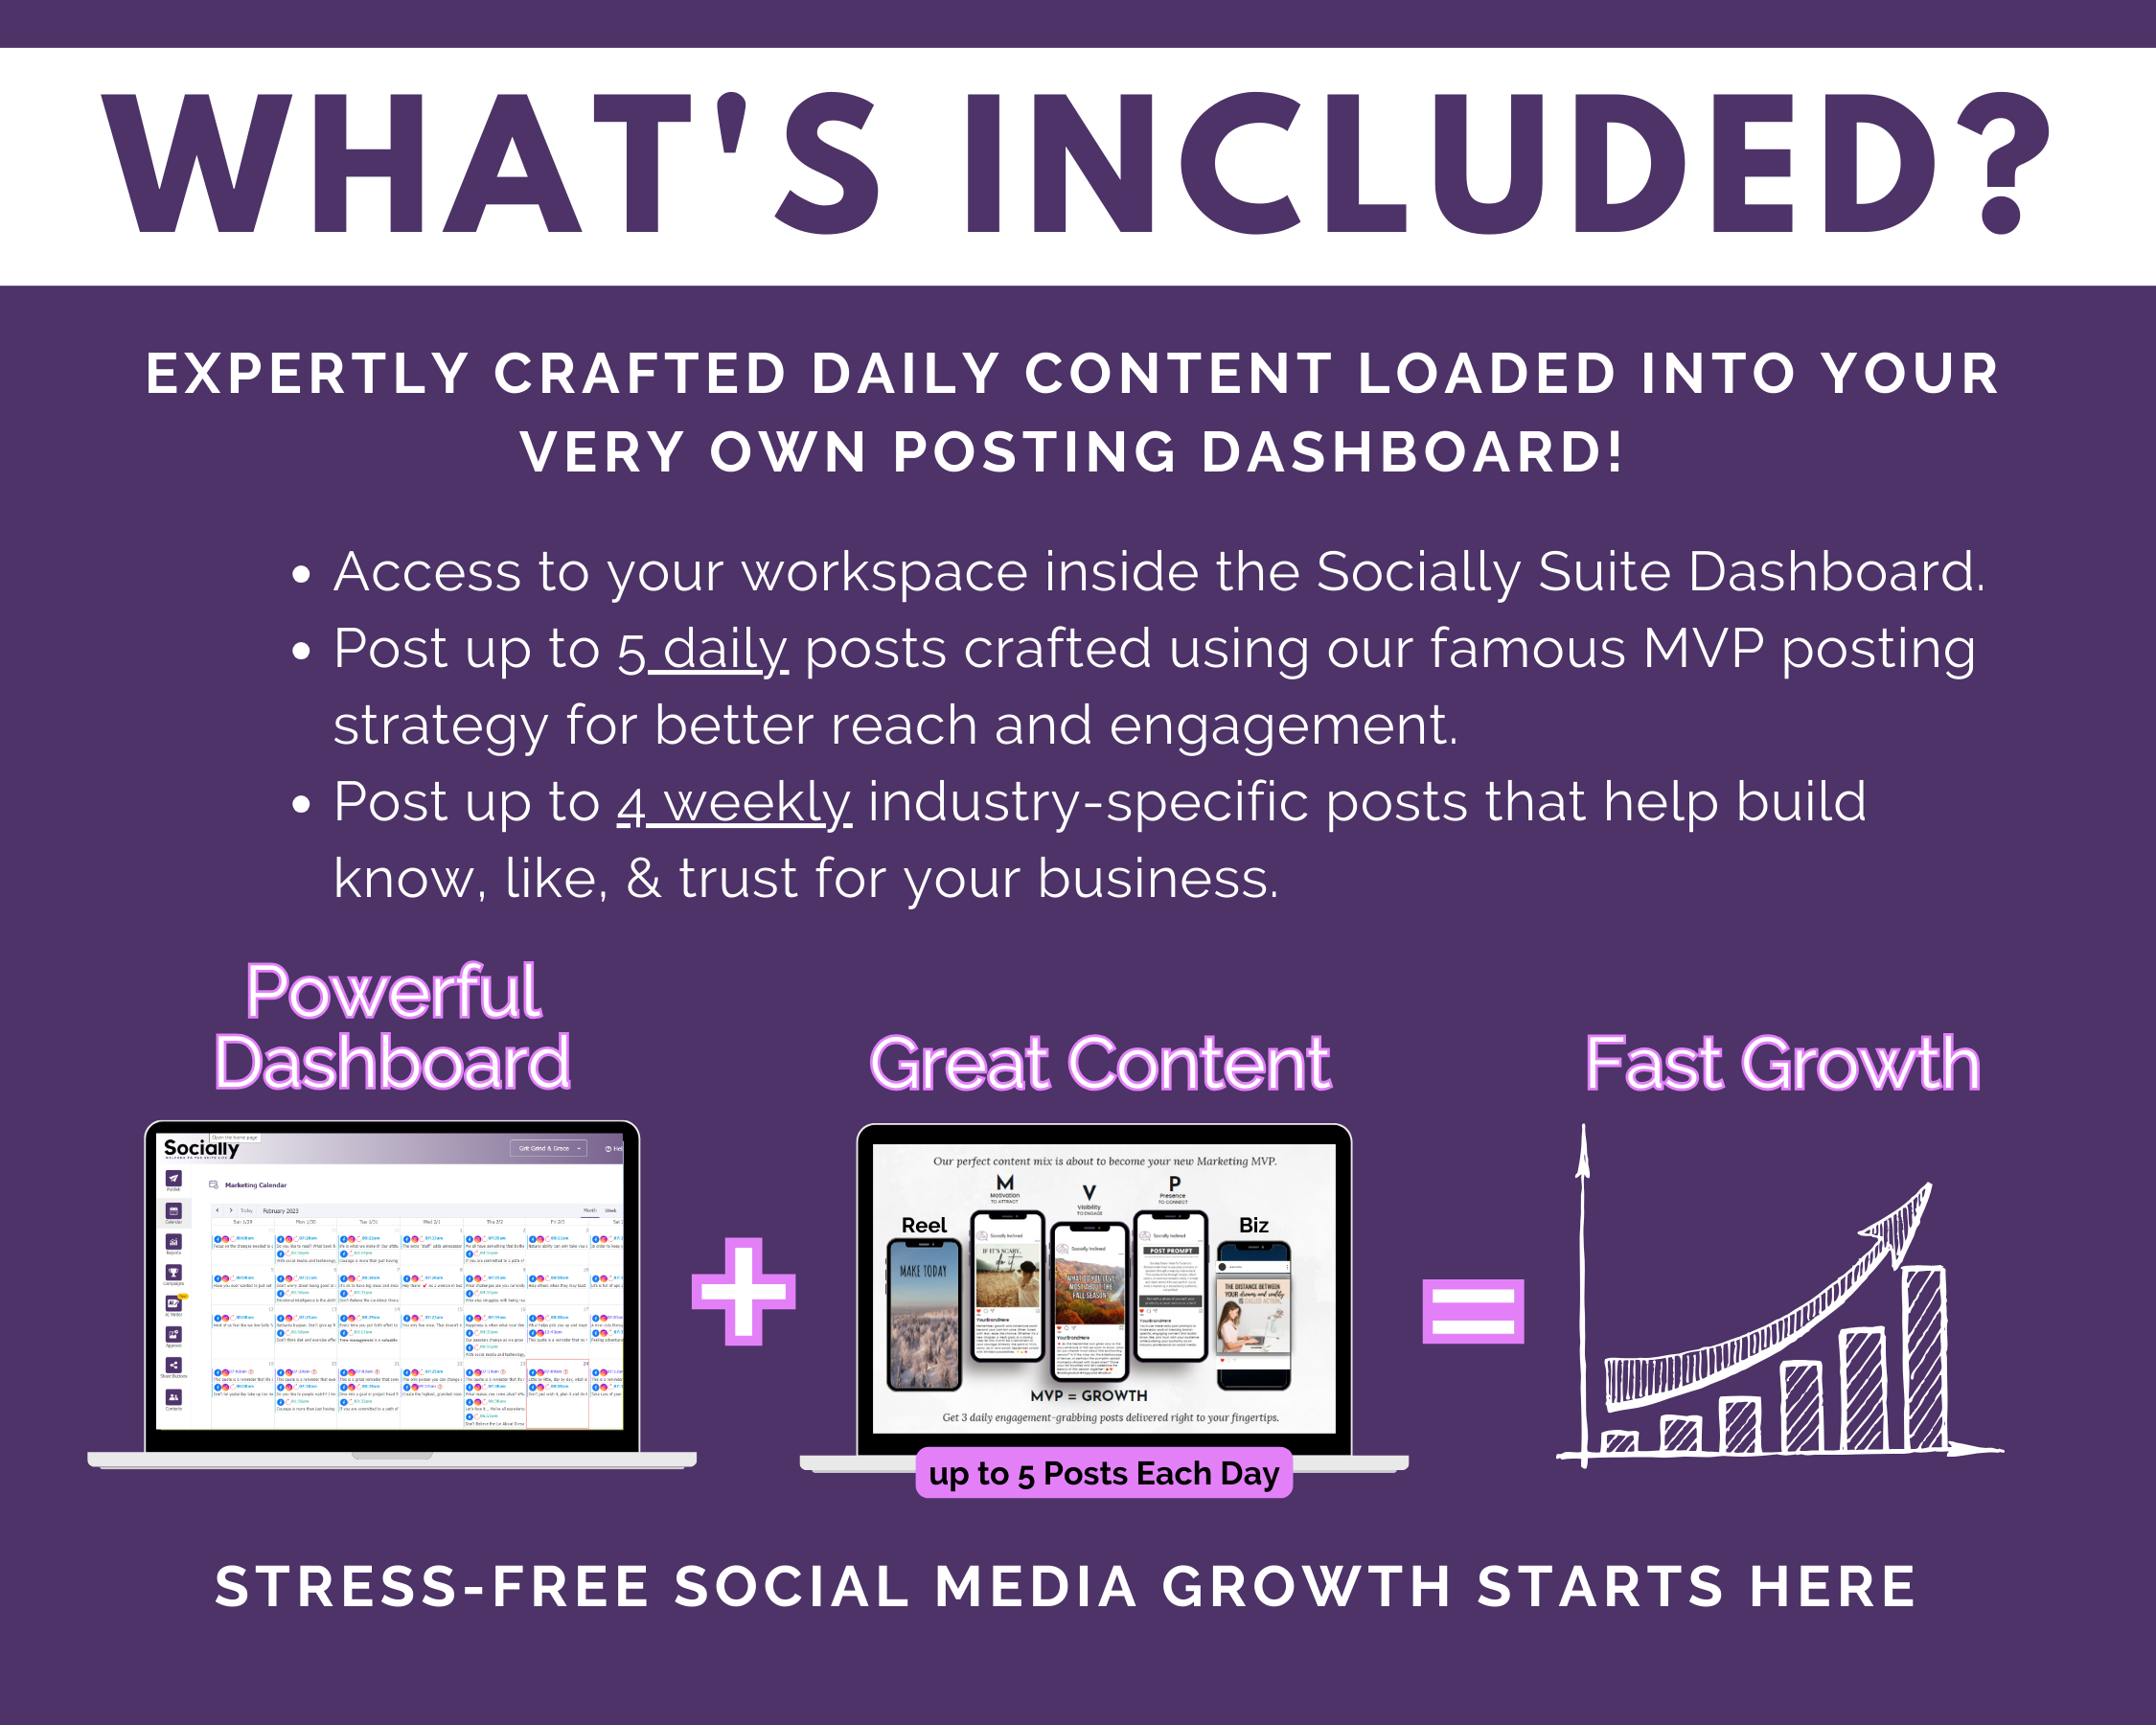 What's included in this package is a comprehensive content management system and social media marketing strategy using the powerful Get Socially Inclined Socially Suite Membership.